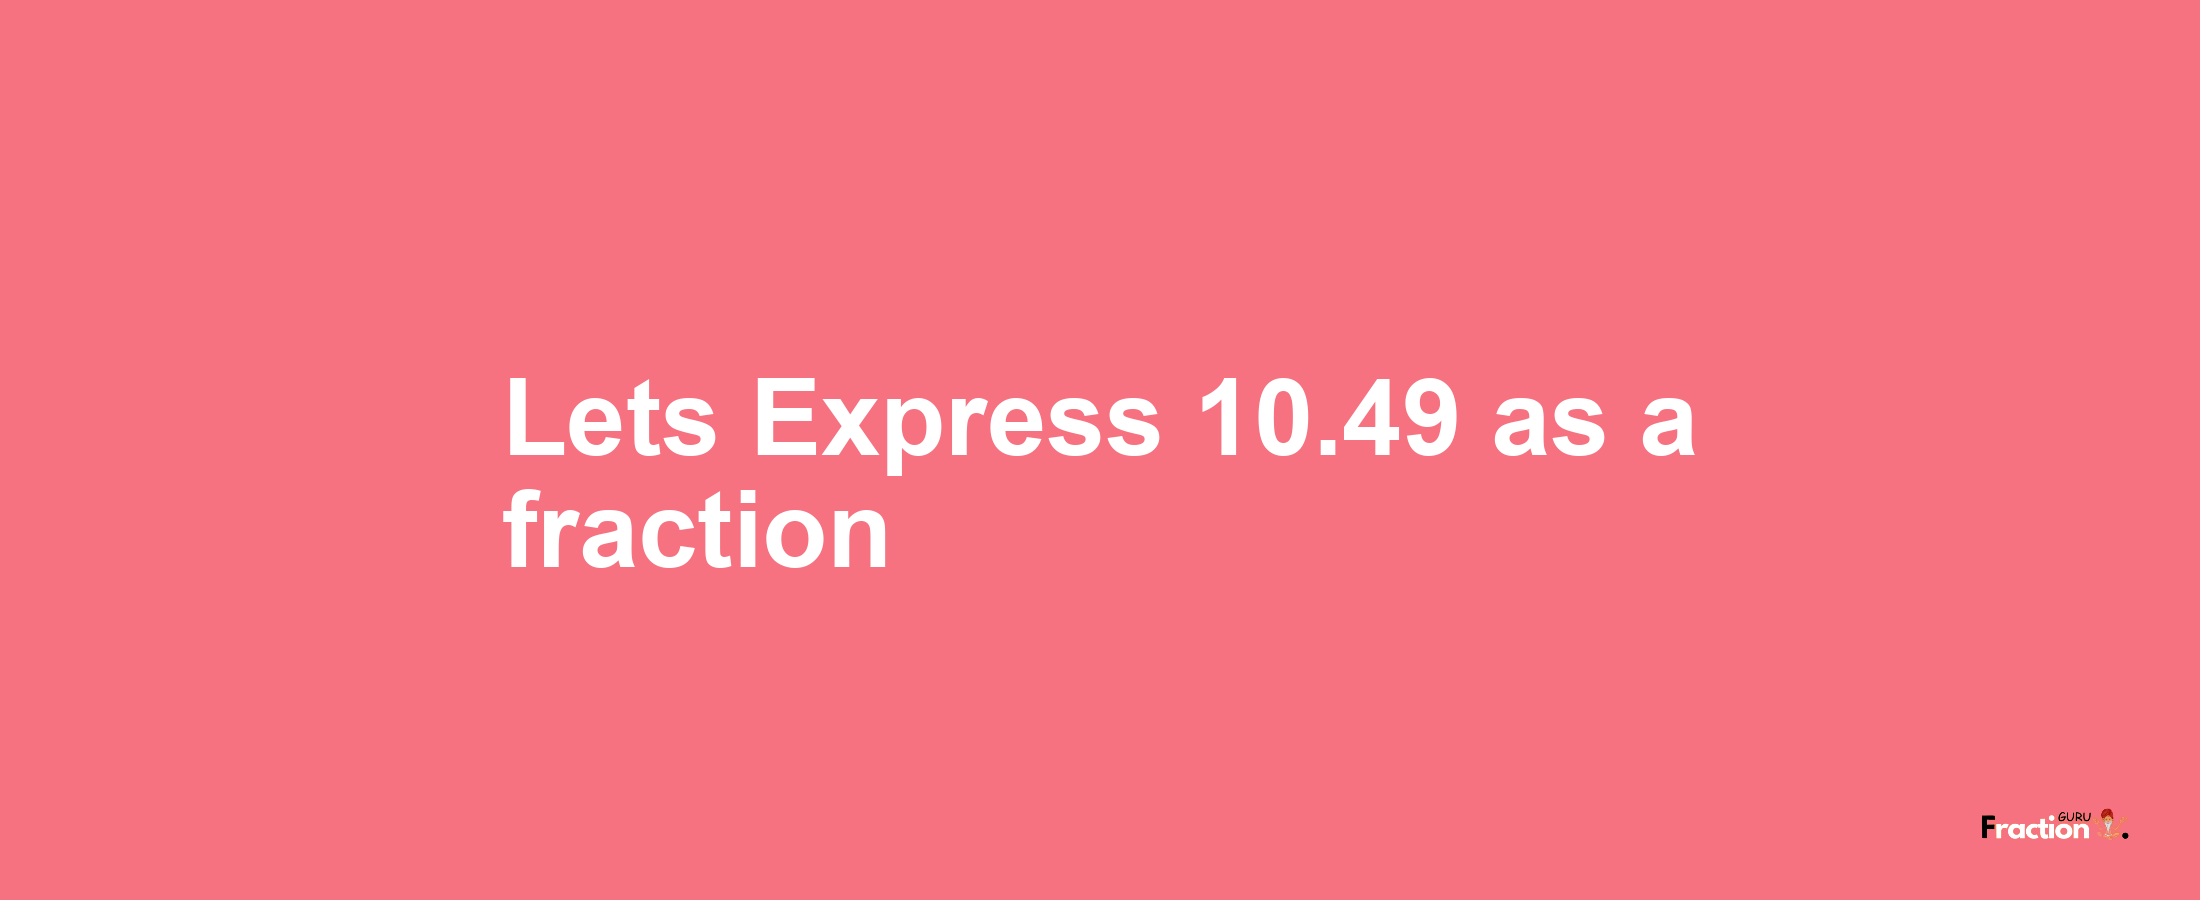 Lets Express 10.49 as afraction